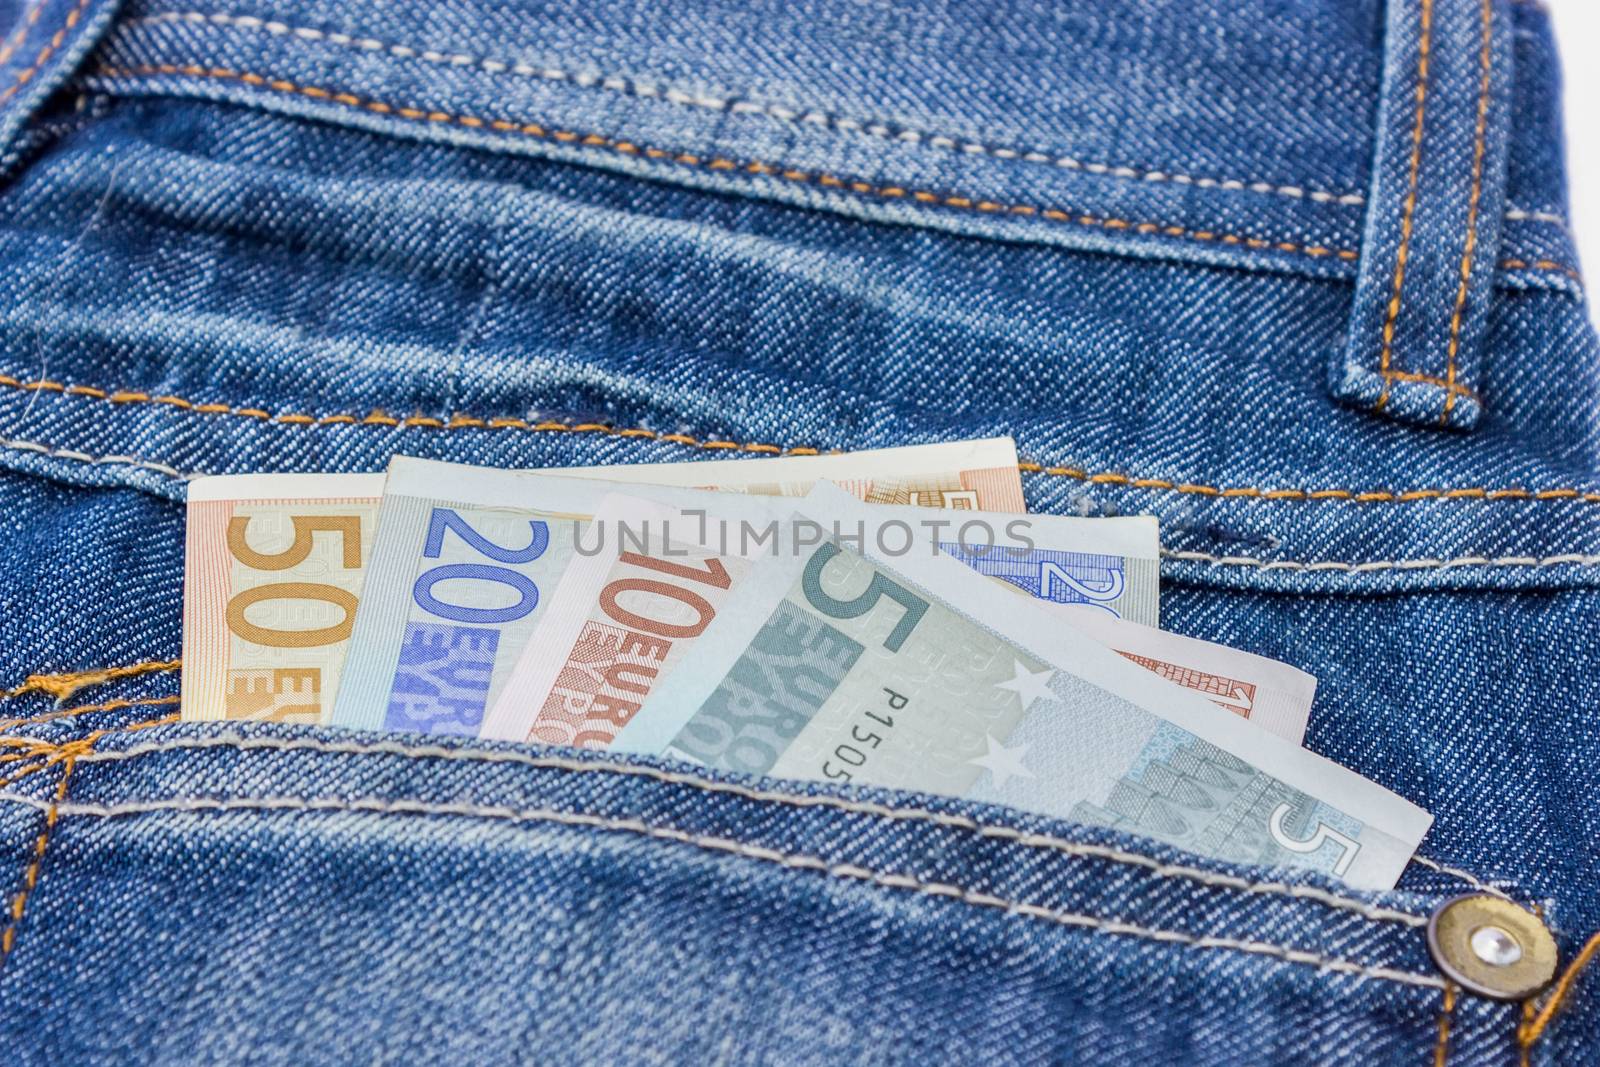 Jeans with euro bills in back pocket as symbol for money to spend